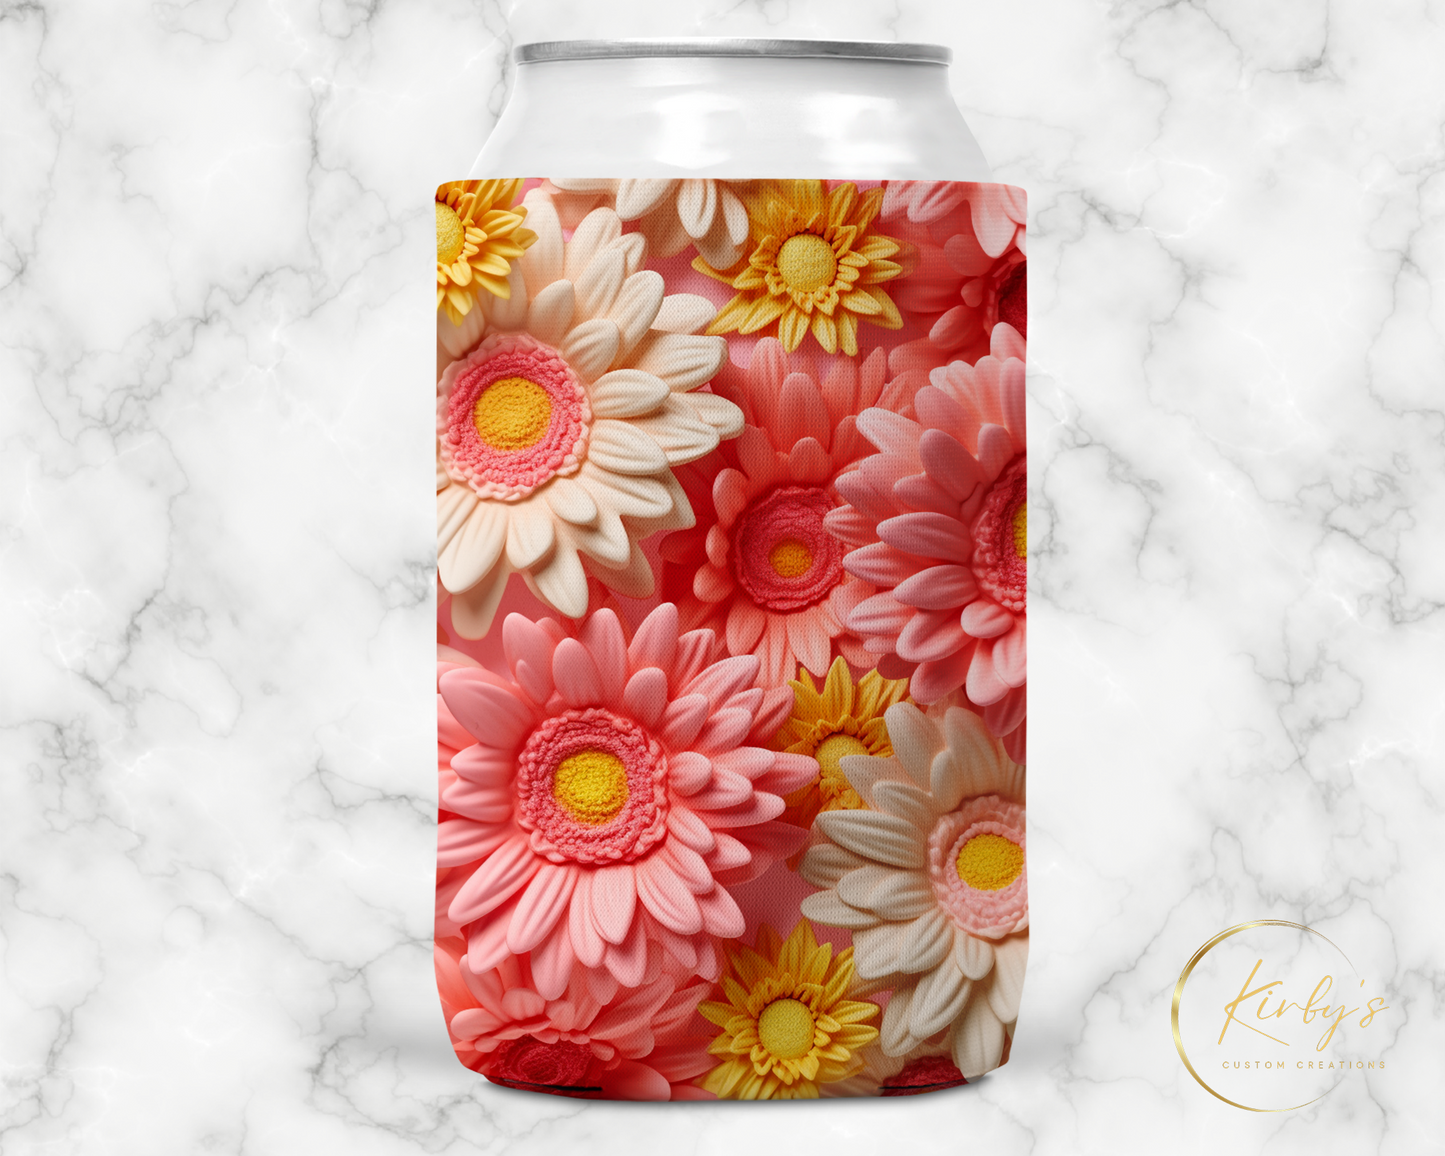 3D Floral Can Holder Pink White Yellow Flowers Standard Soft Koozie